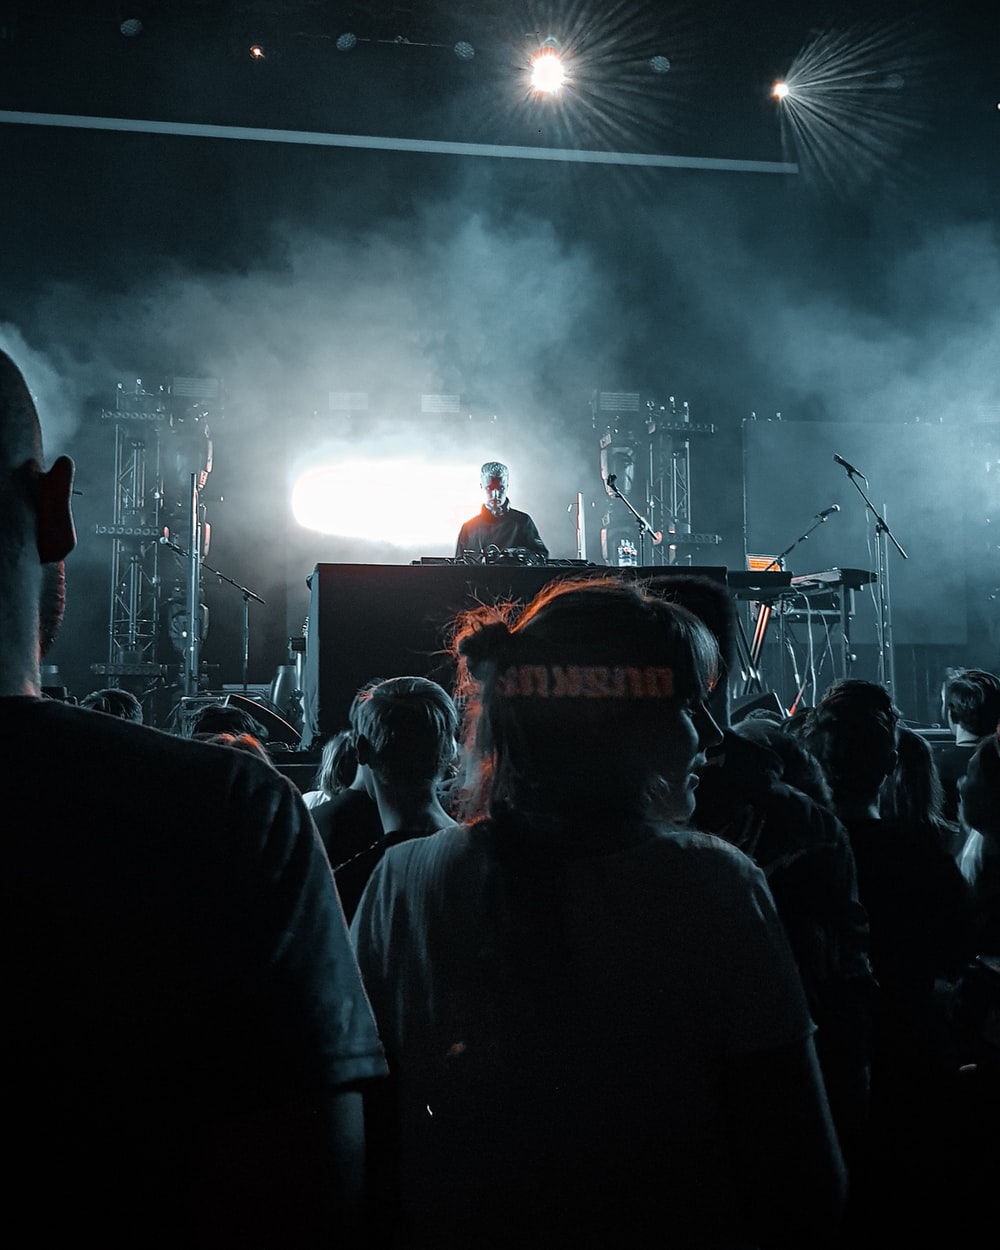 DJ performing on stage in front of people photo